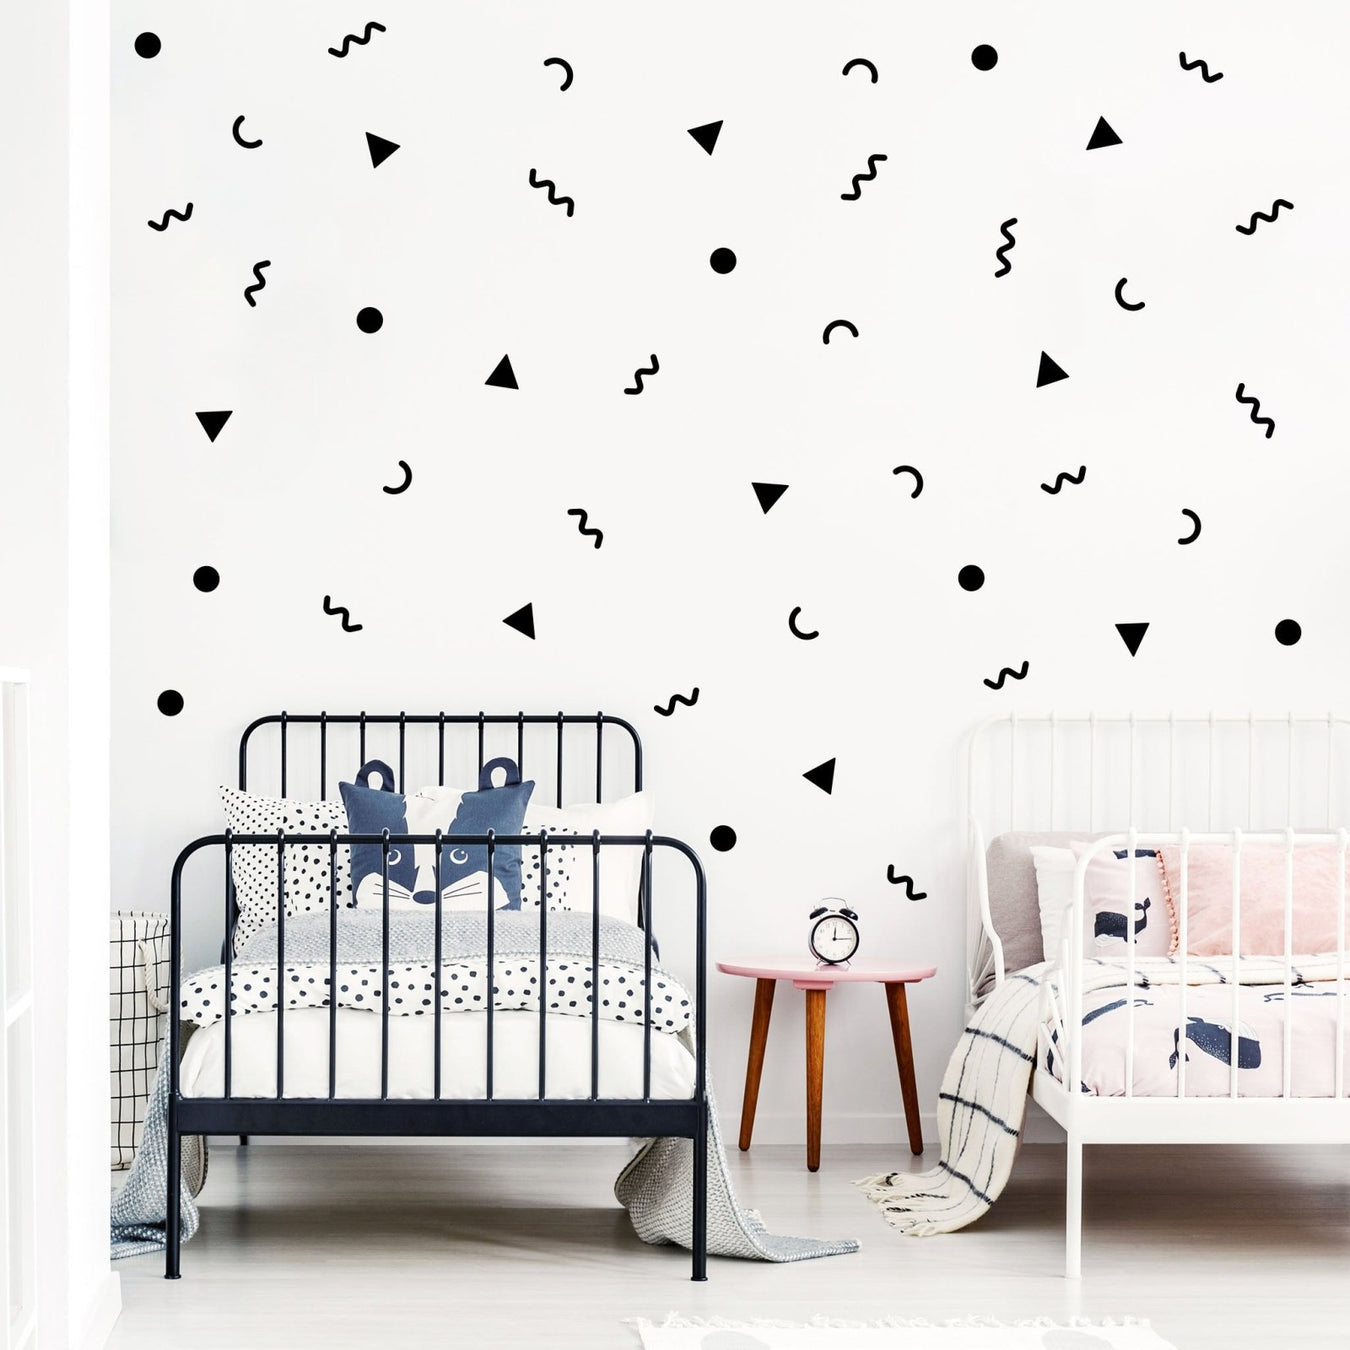 The cutest wall decals for older Kids - Made of Sundays